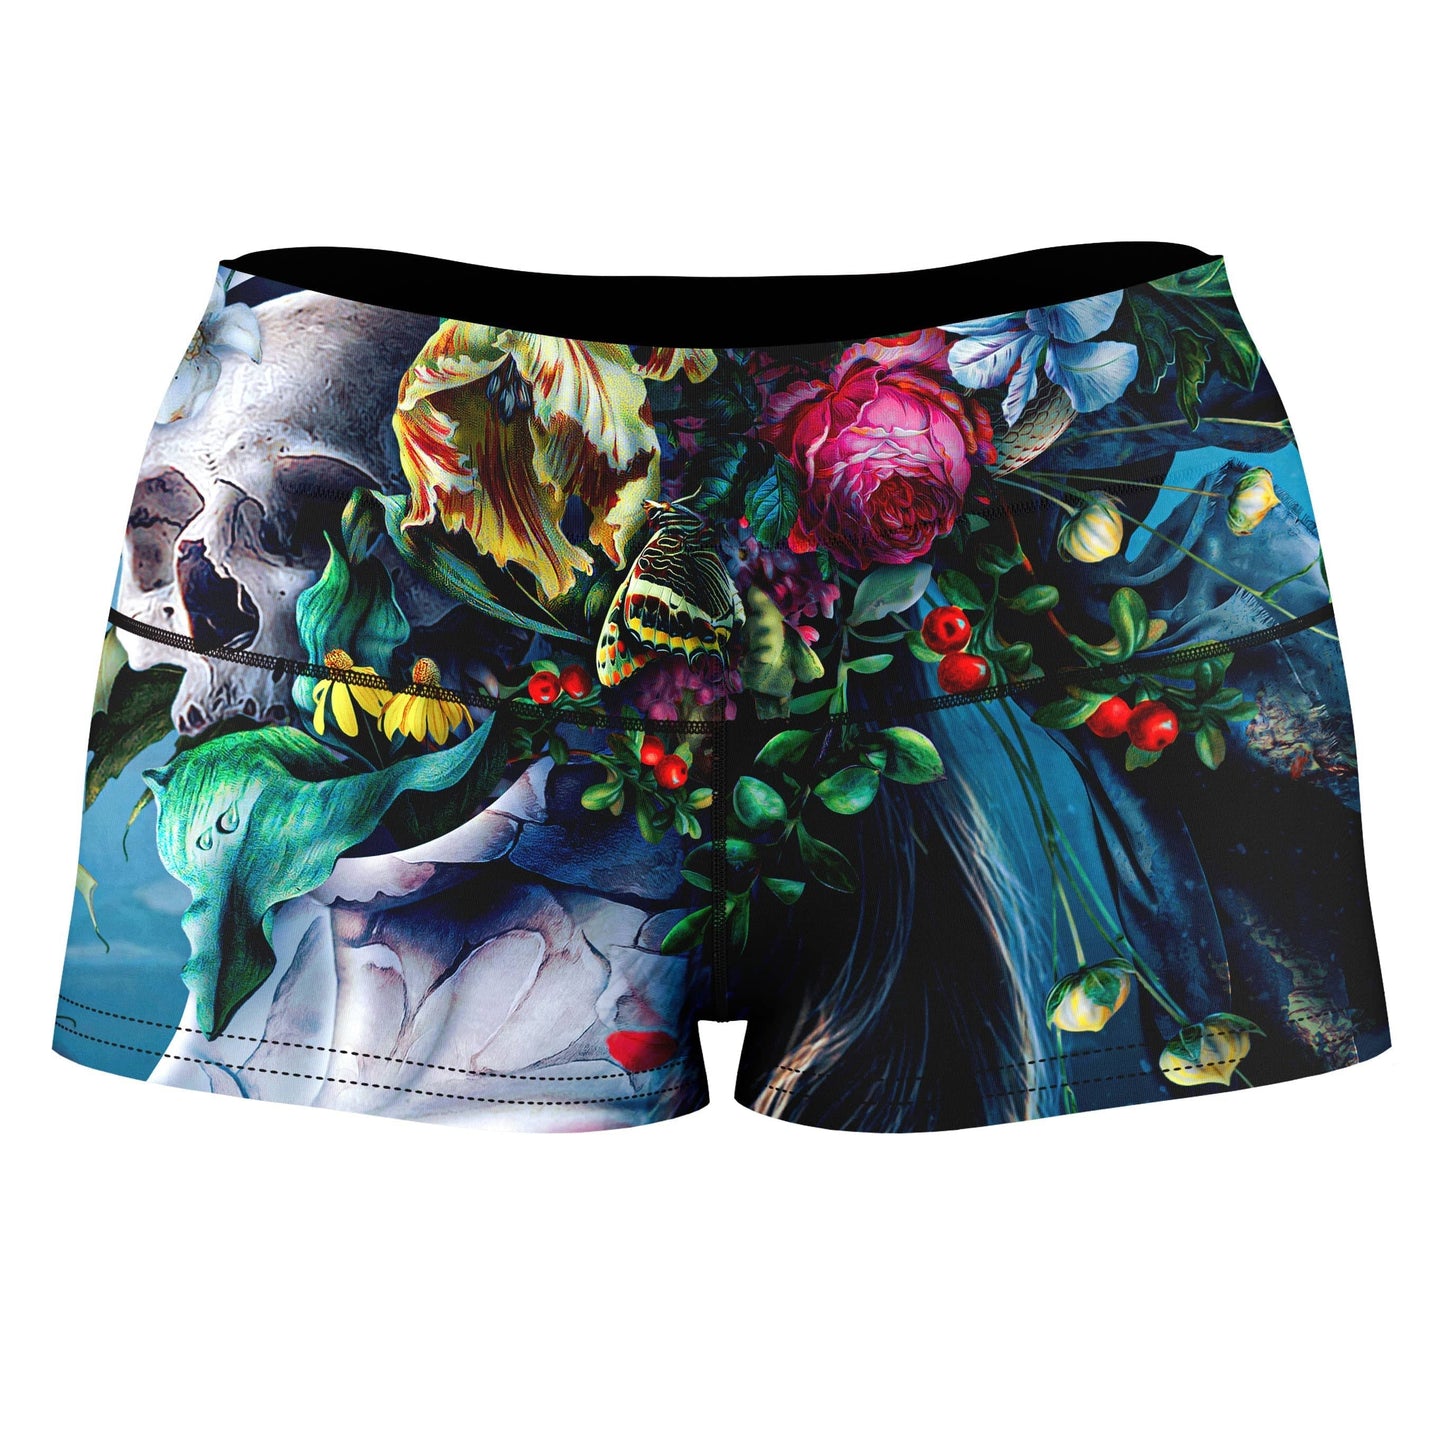 Live and Die High-Waisted Women's Shorts, Riza Peker, | iEDM